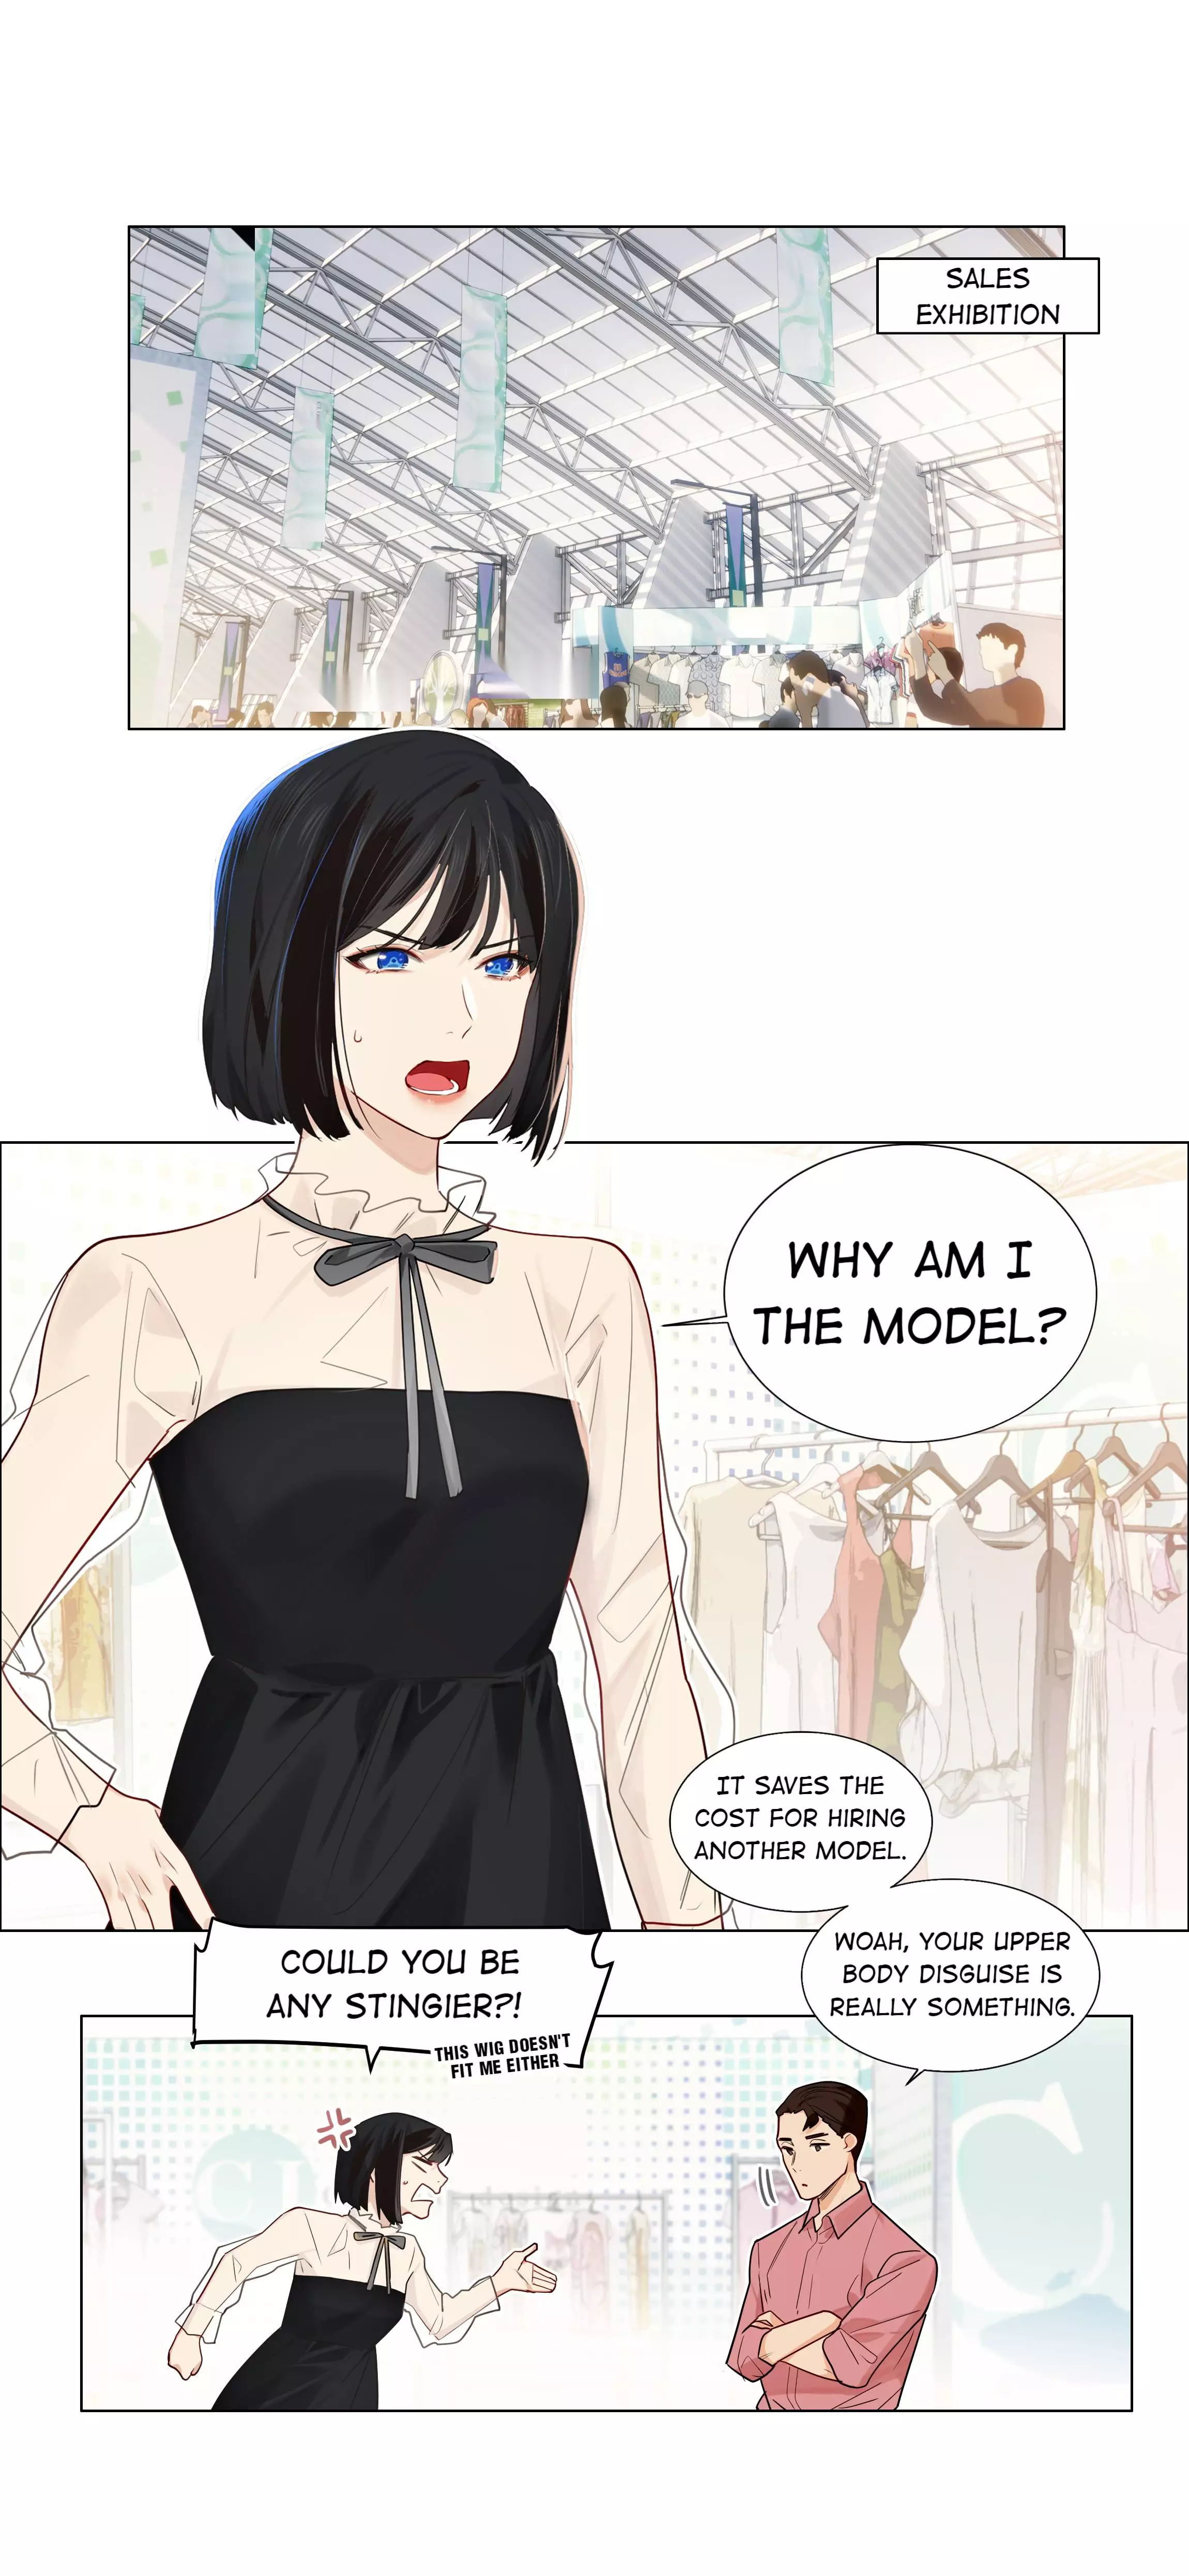 It's Not As If I Wanted To Dress Like A Woman - 57 page 4-6dee7023